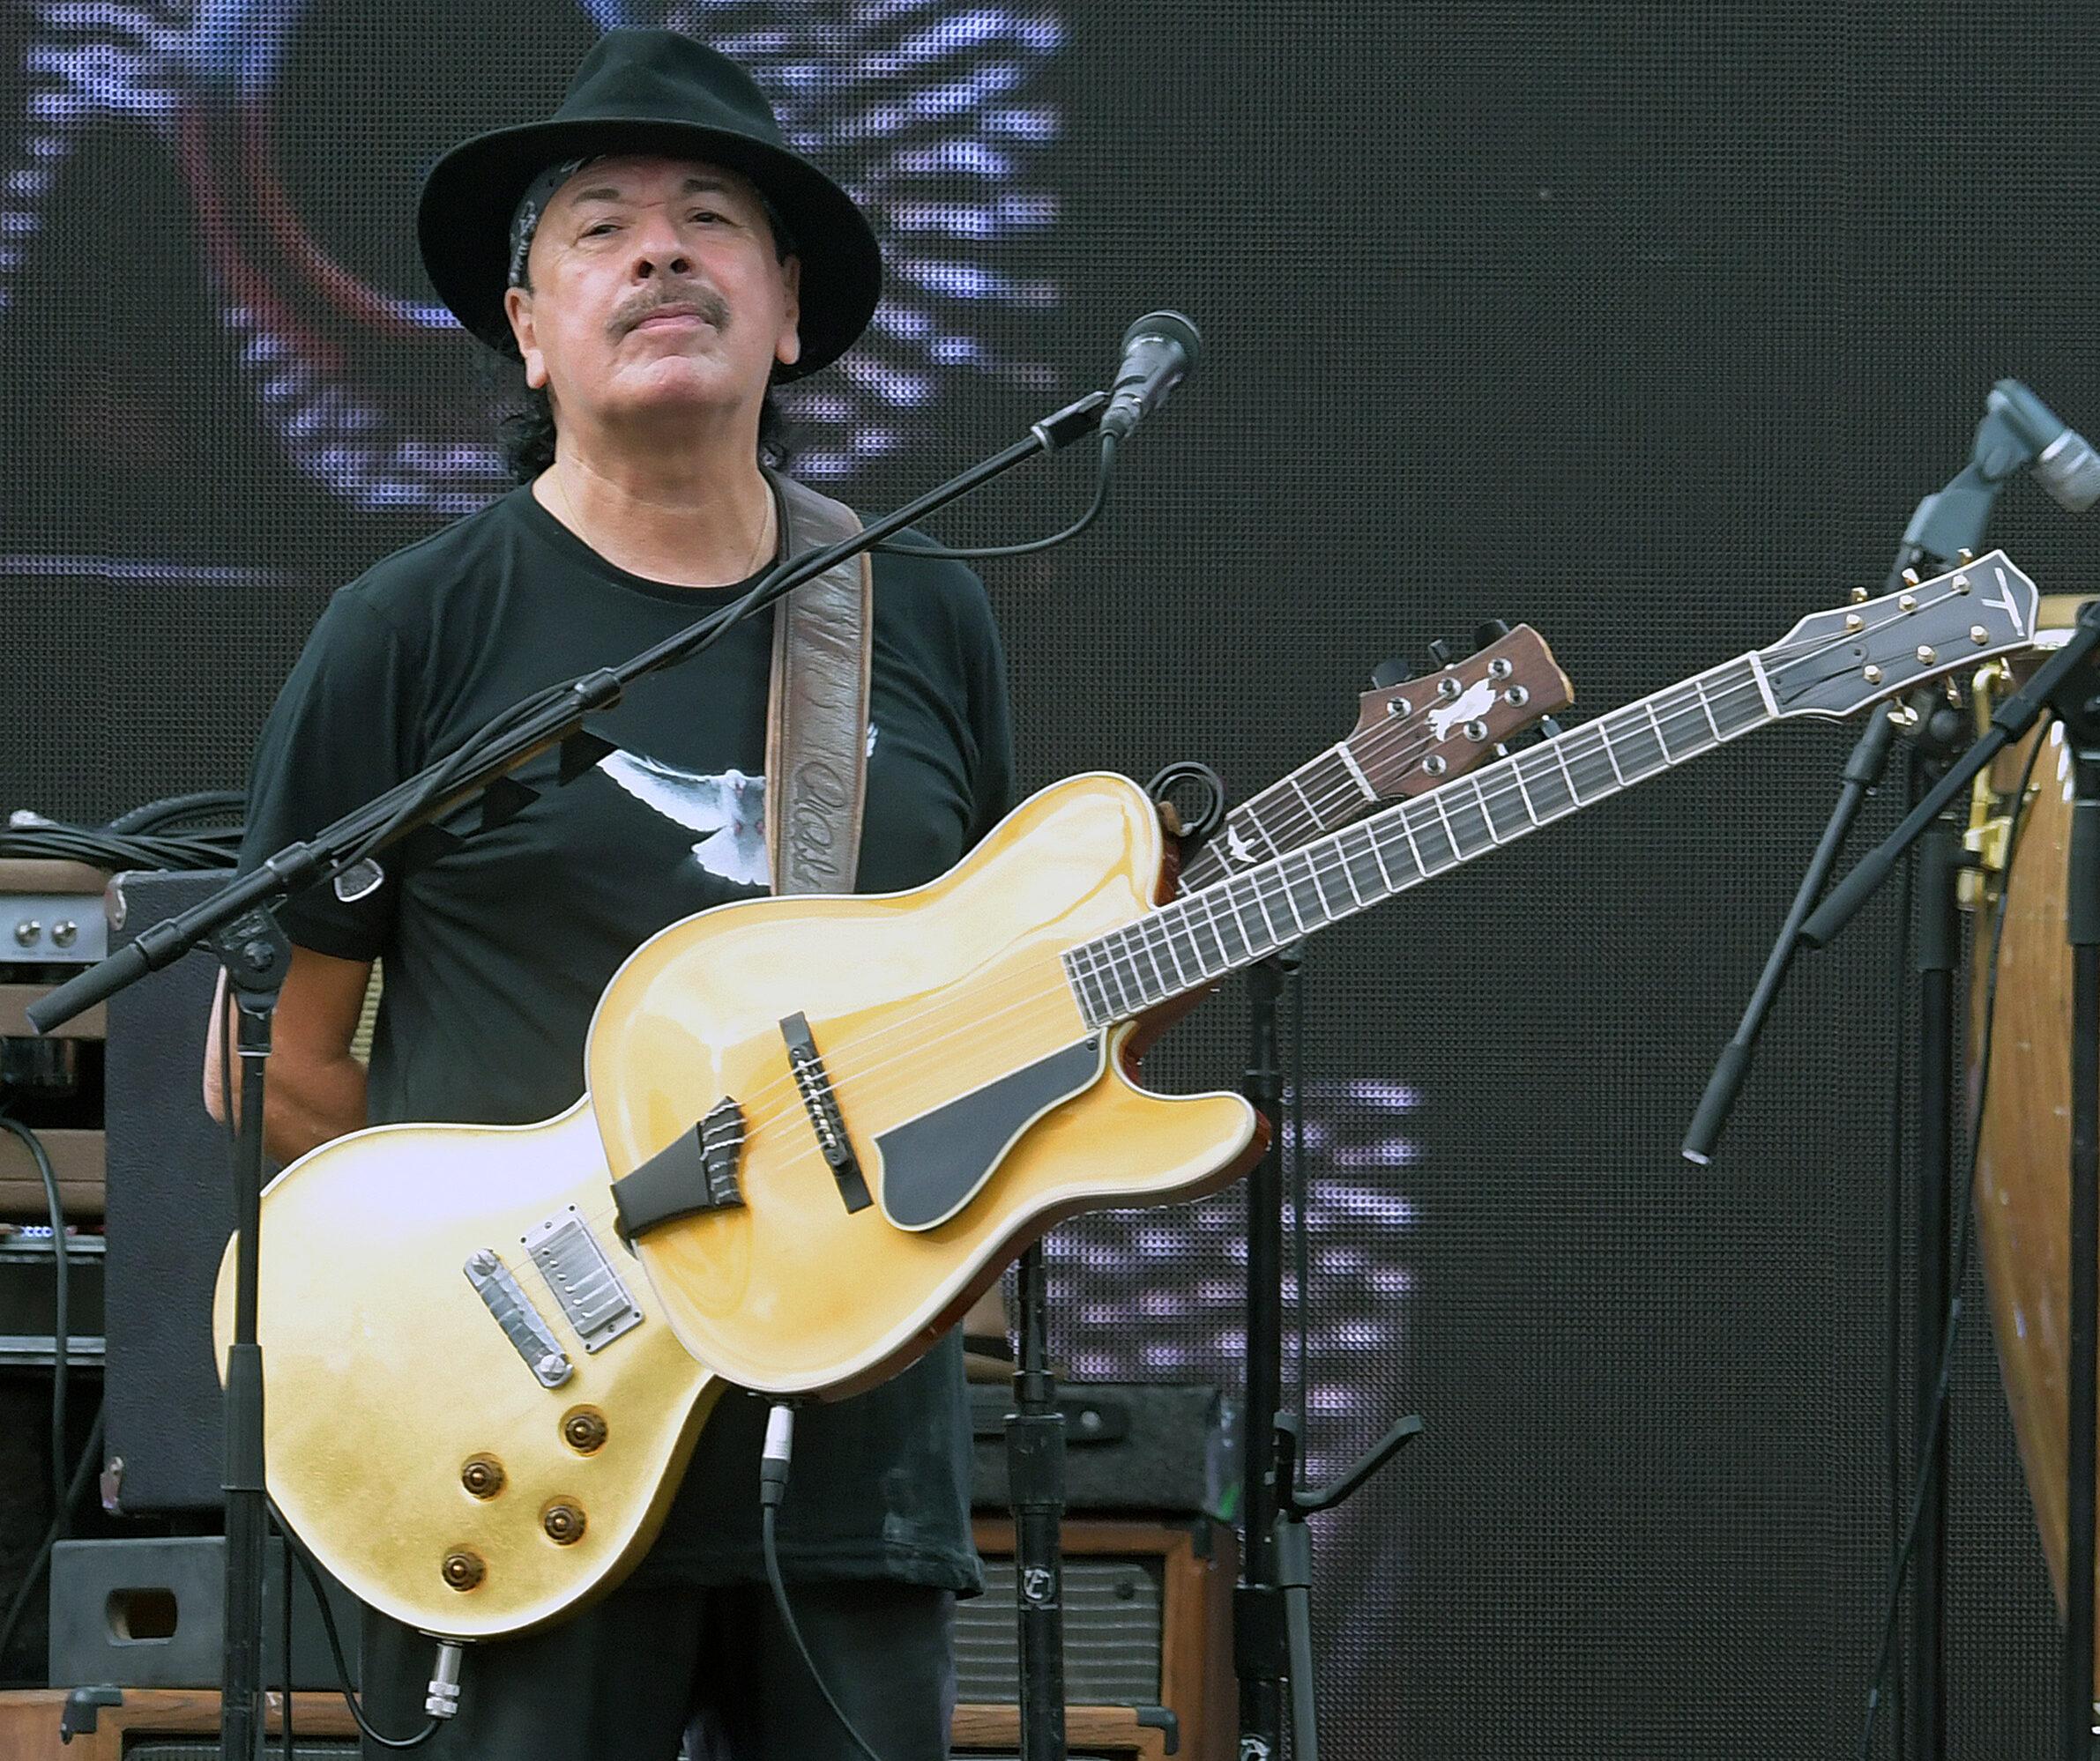 We Love NYC: The Homecoming Concert" in New York City. 21 Aug 2021 Pictured: Carlos Santana.